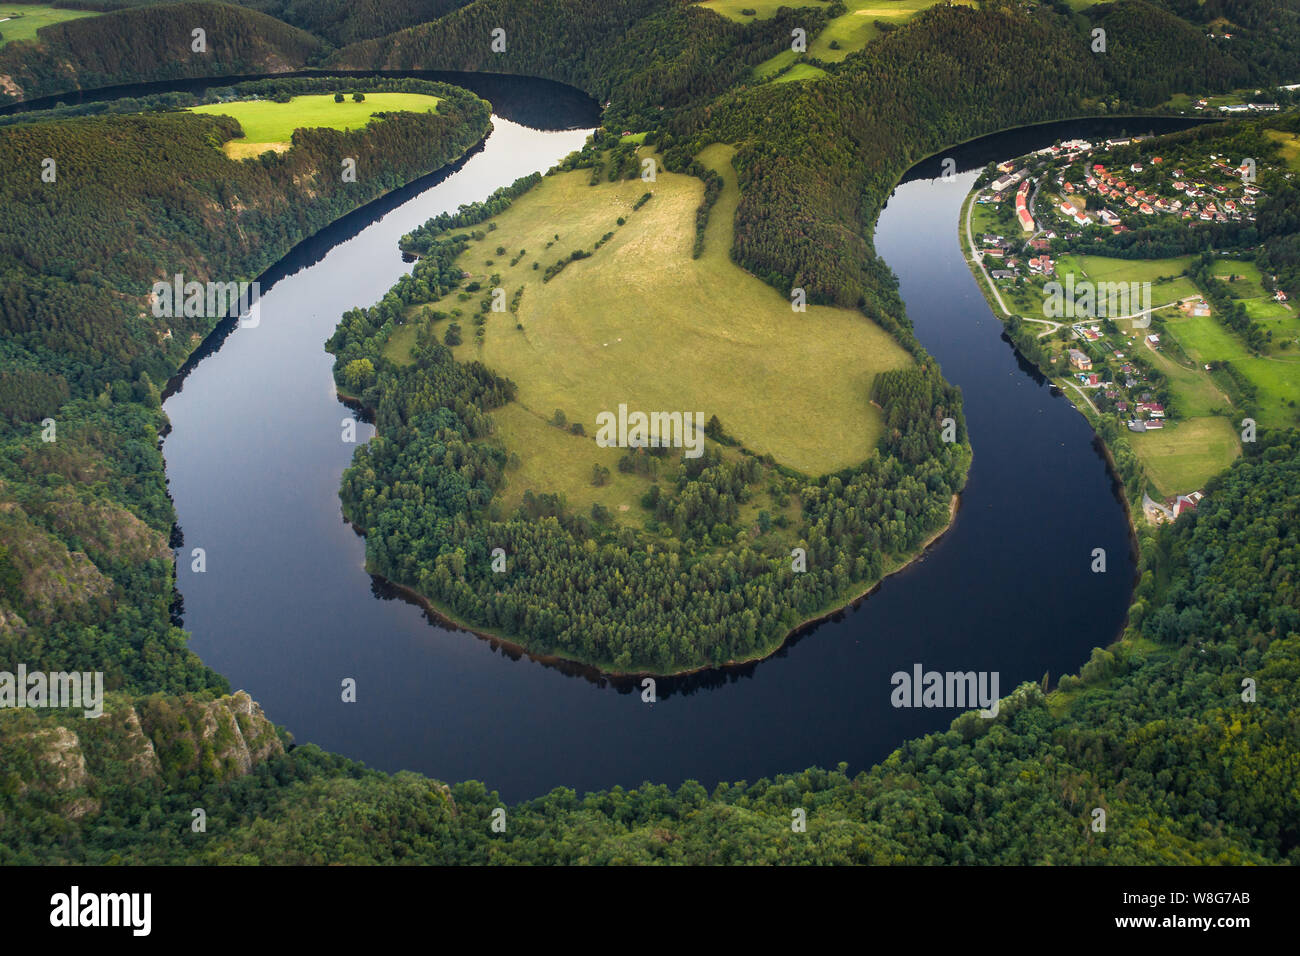 The Vltava river is 430.3 kilometres long and drains an area 28,090 square kilometres in size, over half of Bohemia and about a third of the Czech Stock Photo